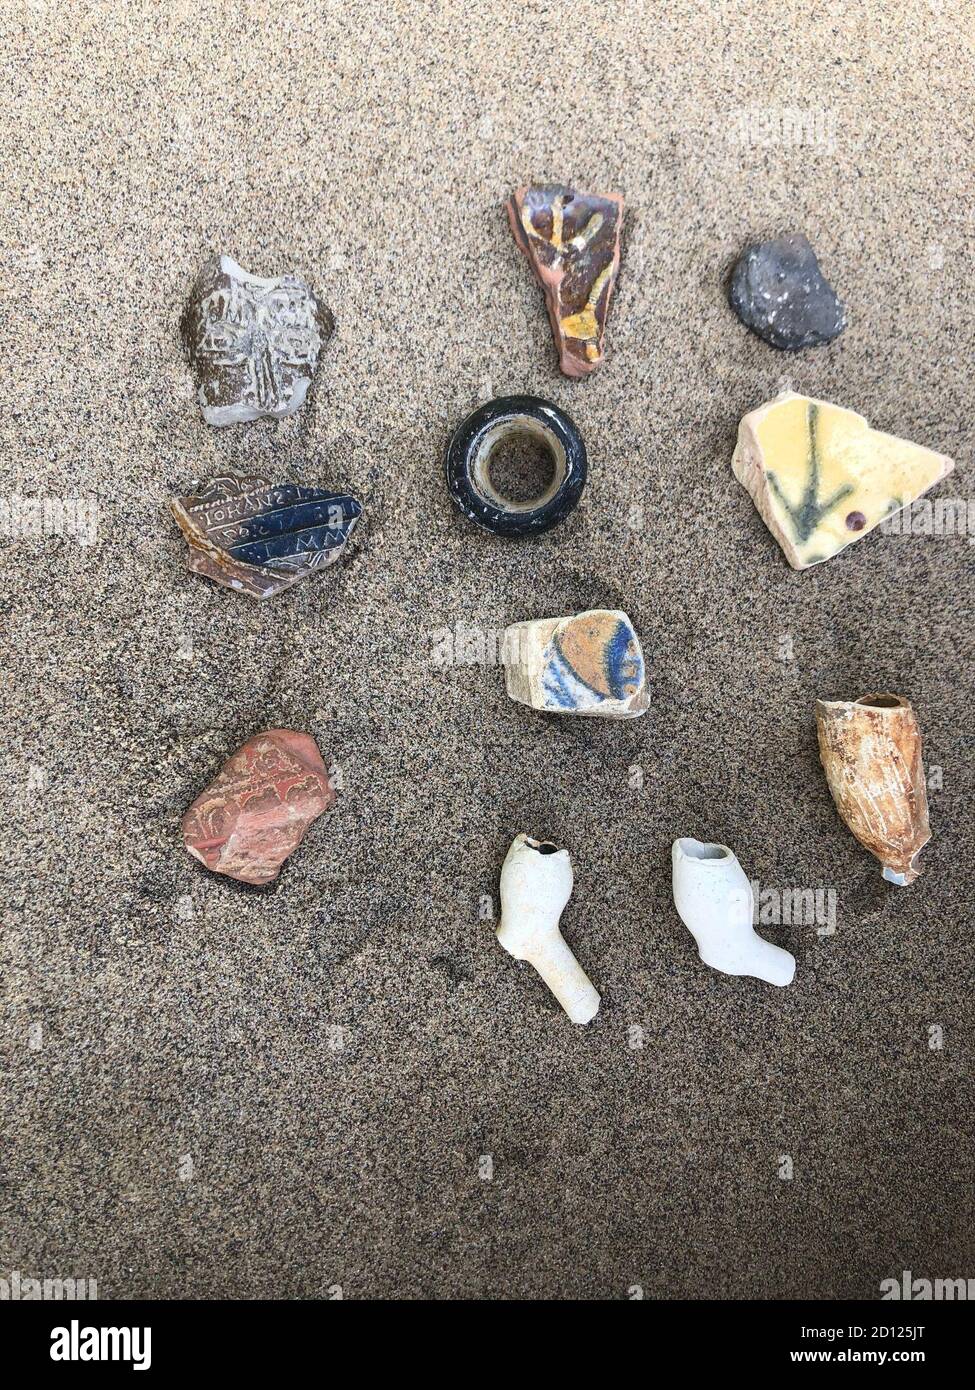 London, UK. 22nd Sep, 2020. Shards of vessels, some of which date back to Roman times, and heads of clay pipes lie on the banks of the Thames. The tides stir up the river bed and wash many relics to the bank. (to dpa: "On a treasure hunt on the banks of the Thames: Mudlarking increasingly popular") Credit: Silvia Kusidlo/dpa/Alamy Live News Stock Photo